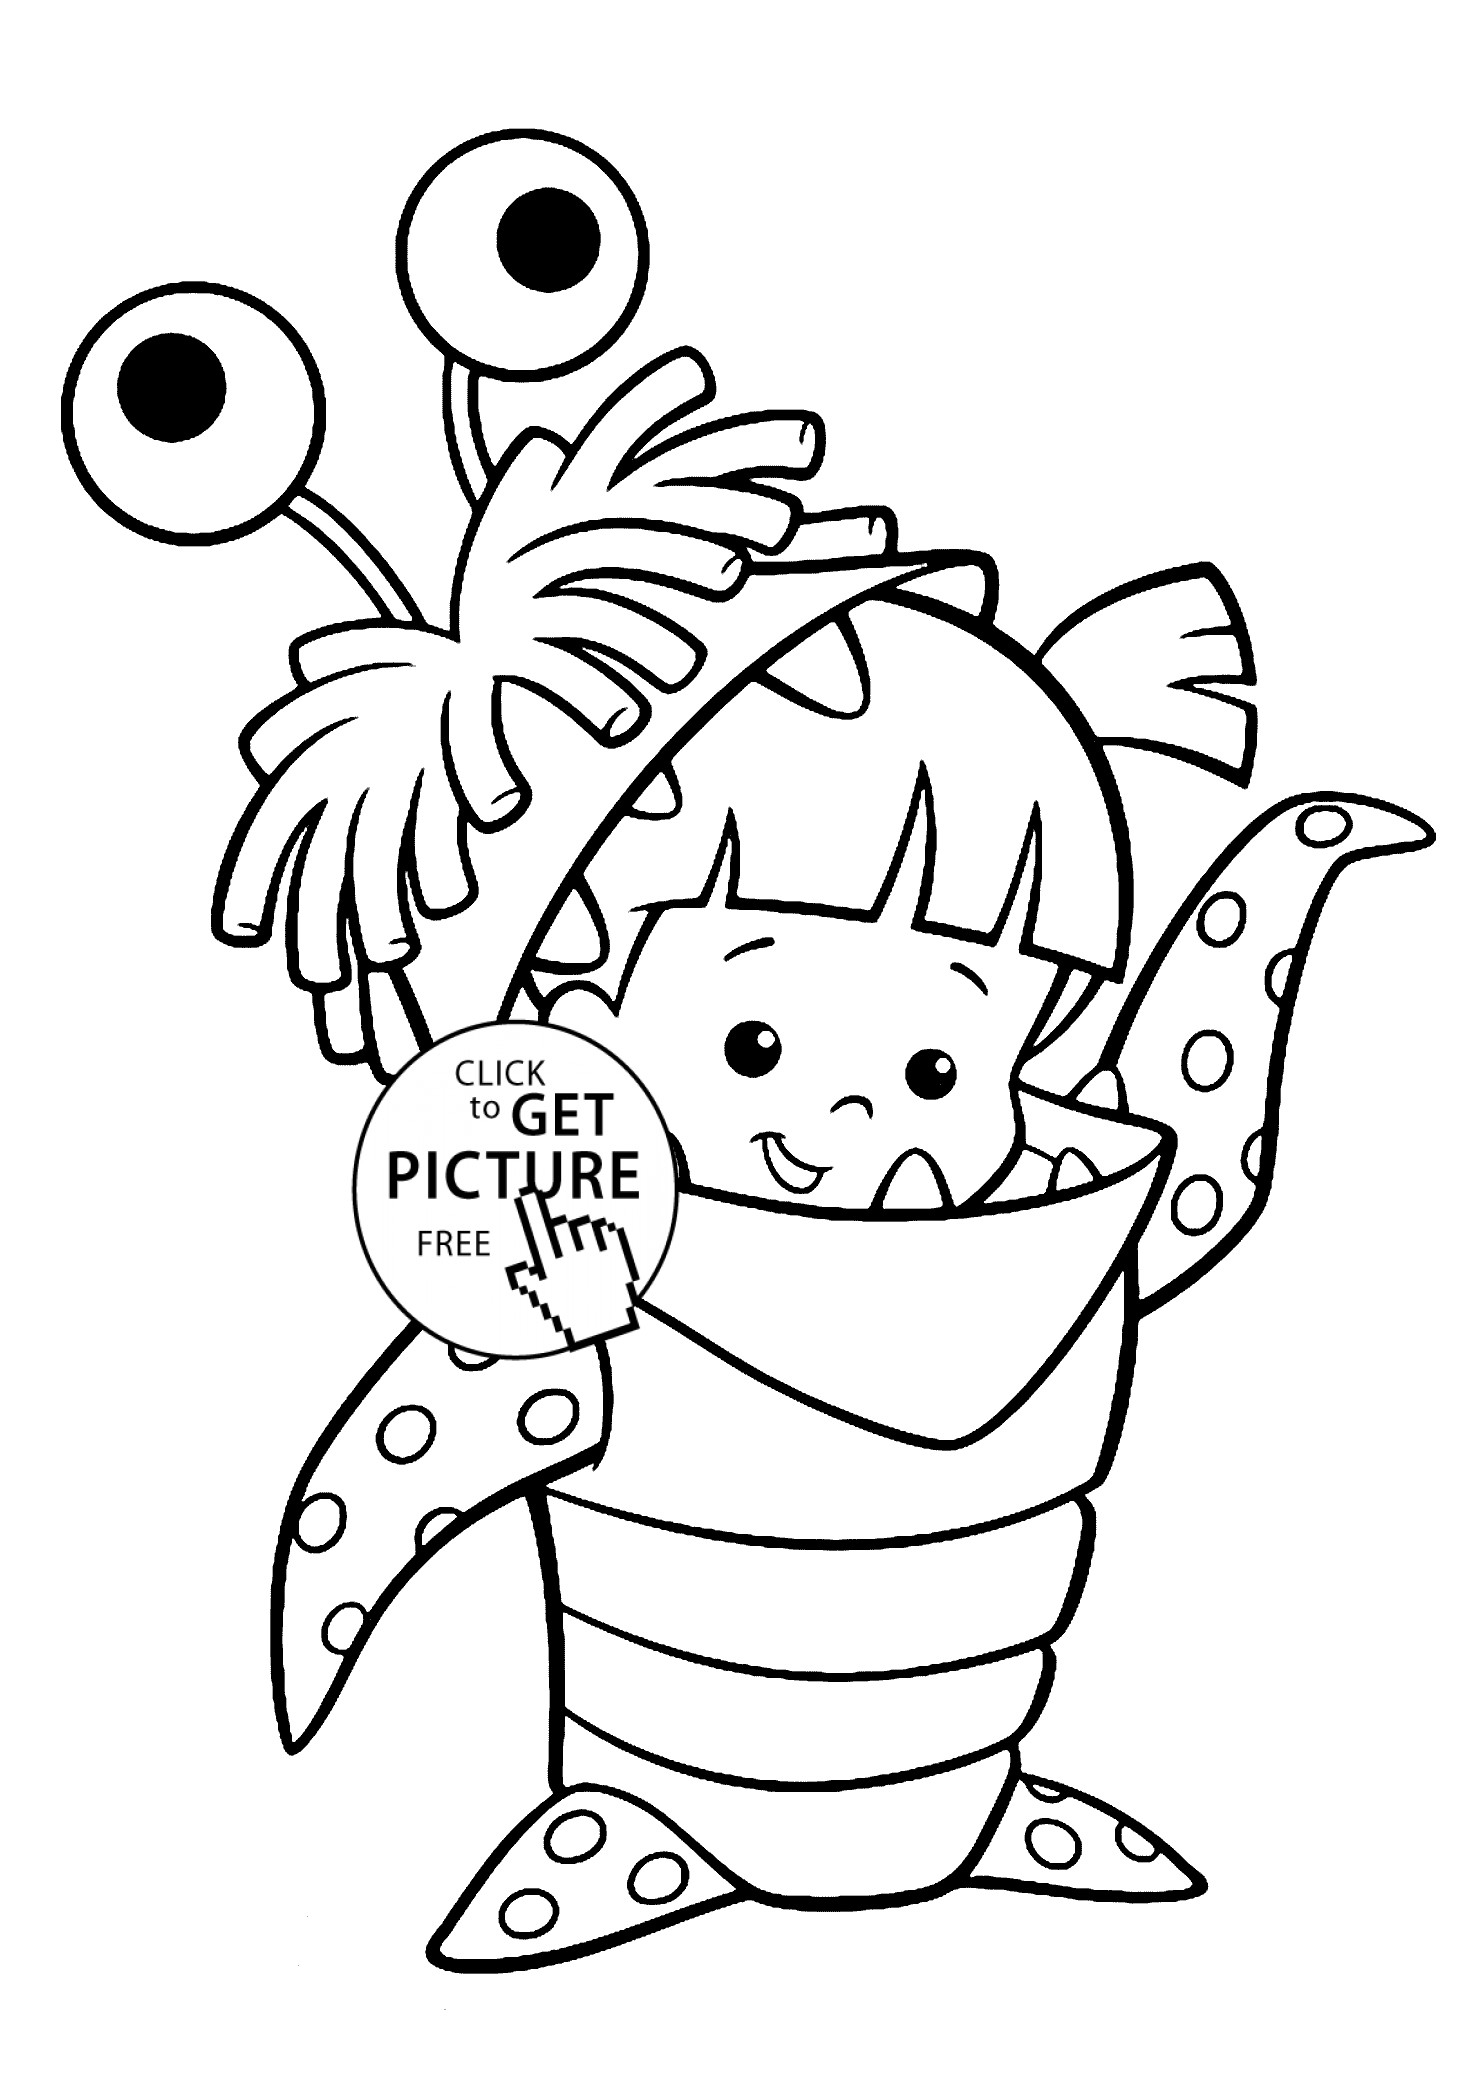 Monsters Coloring Pages
 Boo costume Monster Inc coloring pages for kids printable